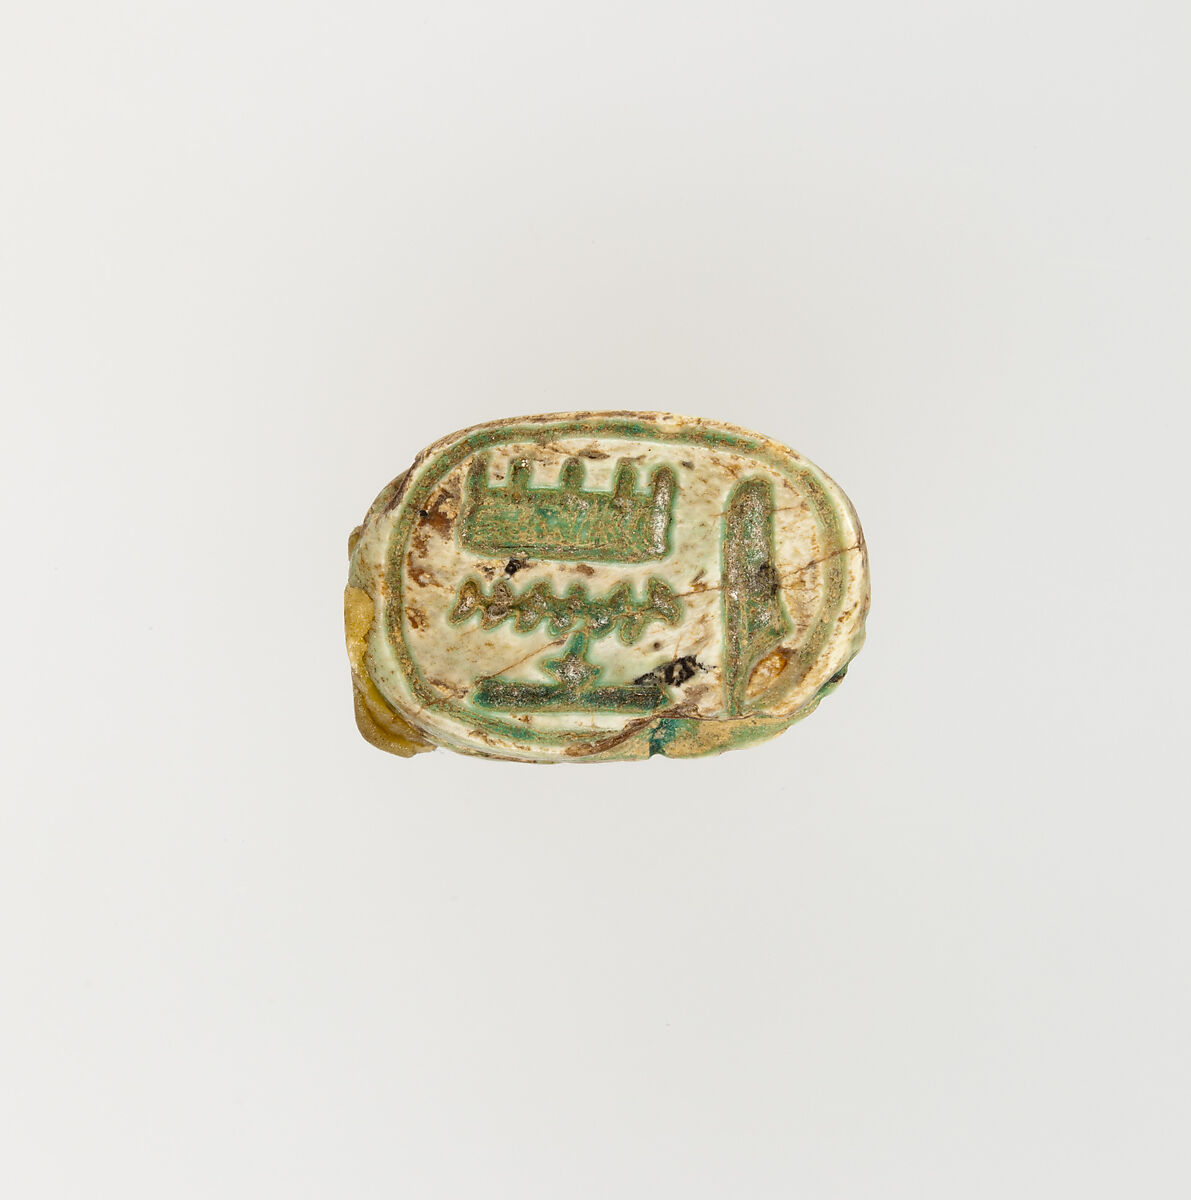 Scarab Inscribed with the Name Amtenhotep, Steatite, glazed 